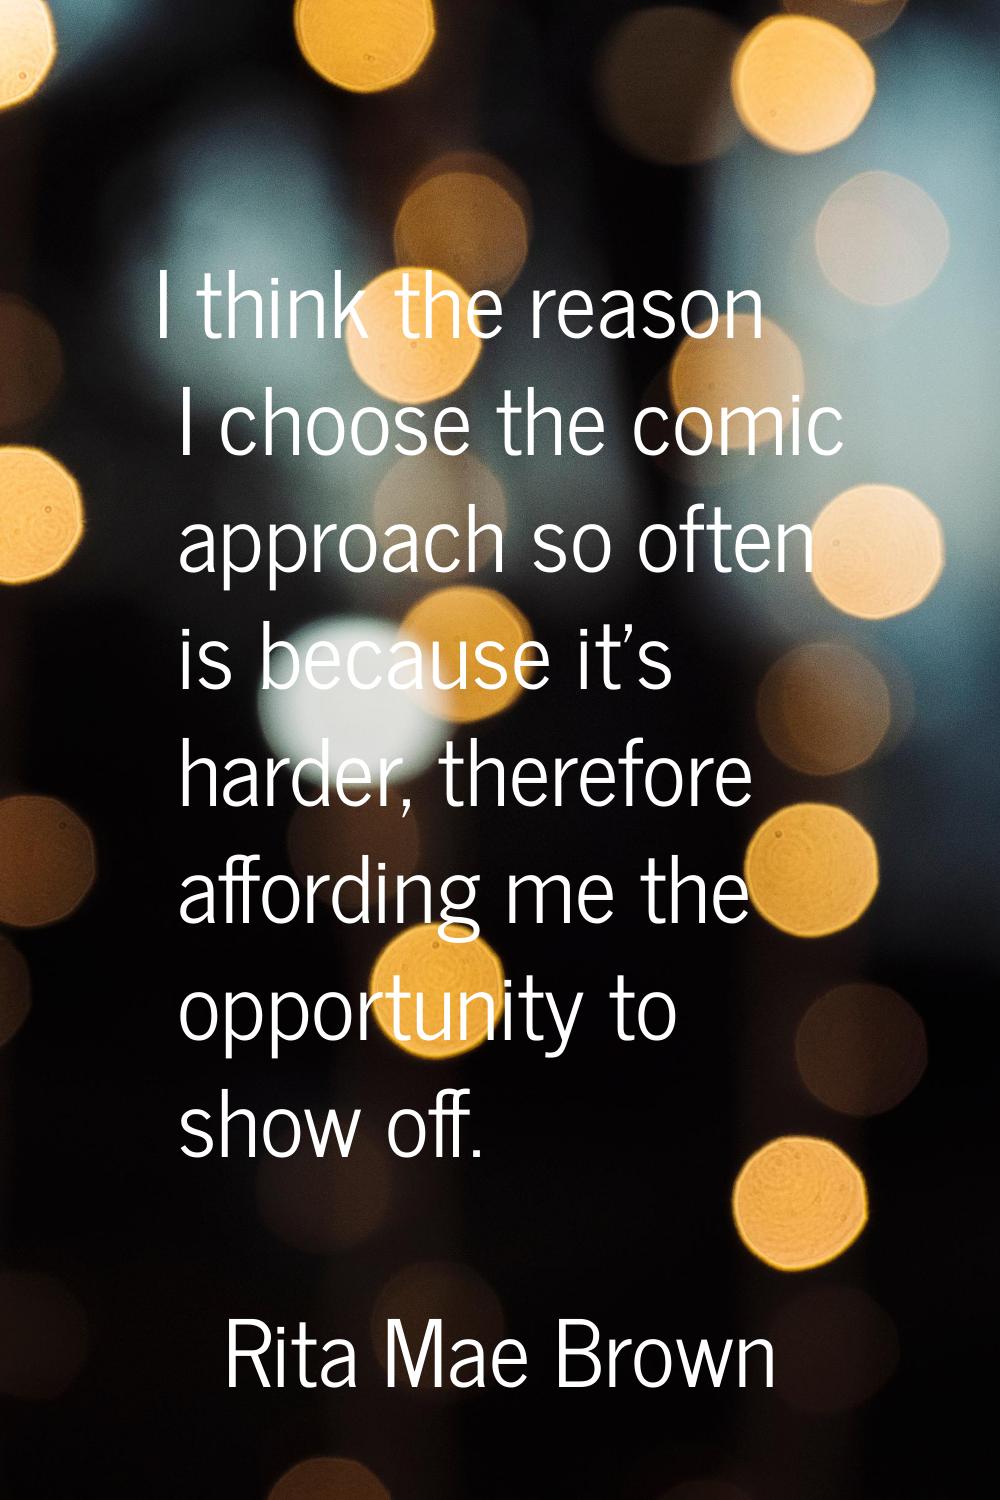 I think the reason I choose the comic approach so often is because it's harder, therefore affording